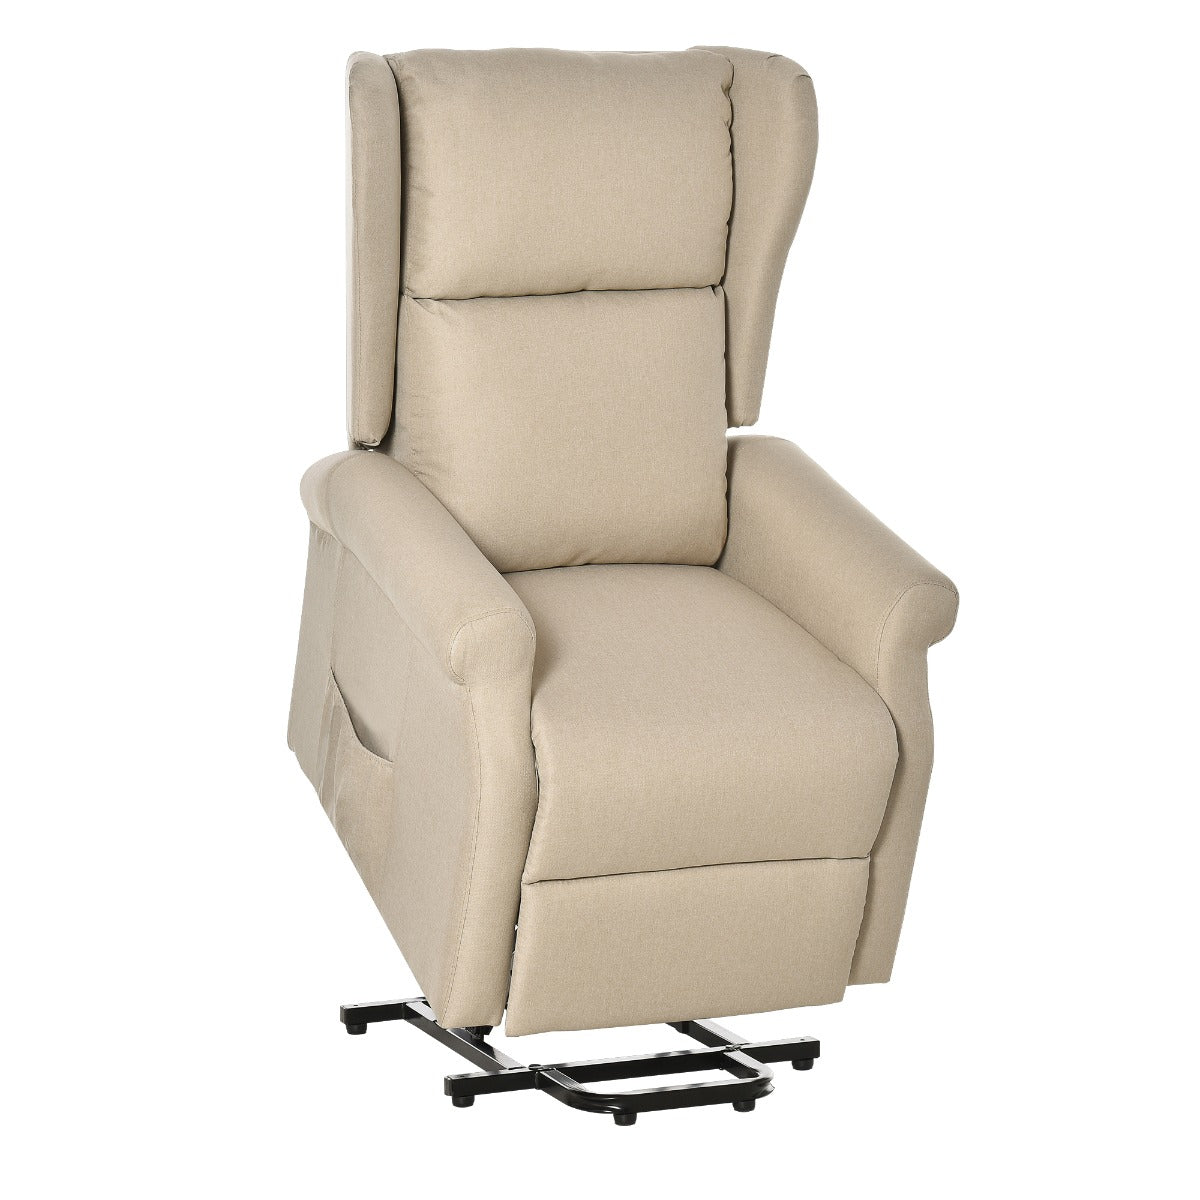 HOMCOM Lift Armchair Electric Power Stand Assist Recliner Chair w/ Remote Control Linen Fabric Beige